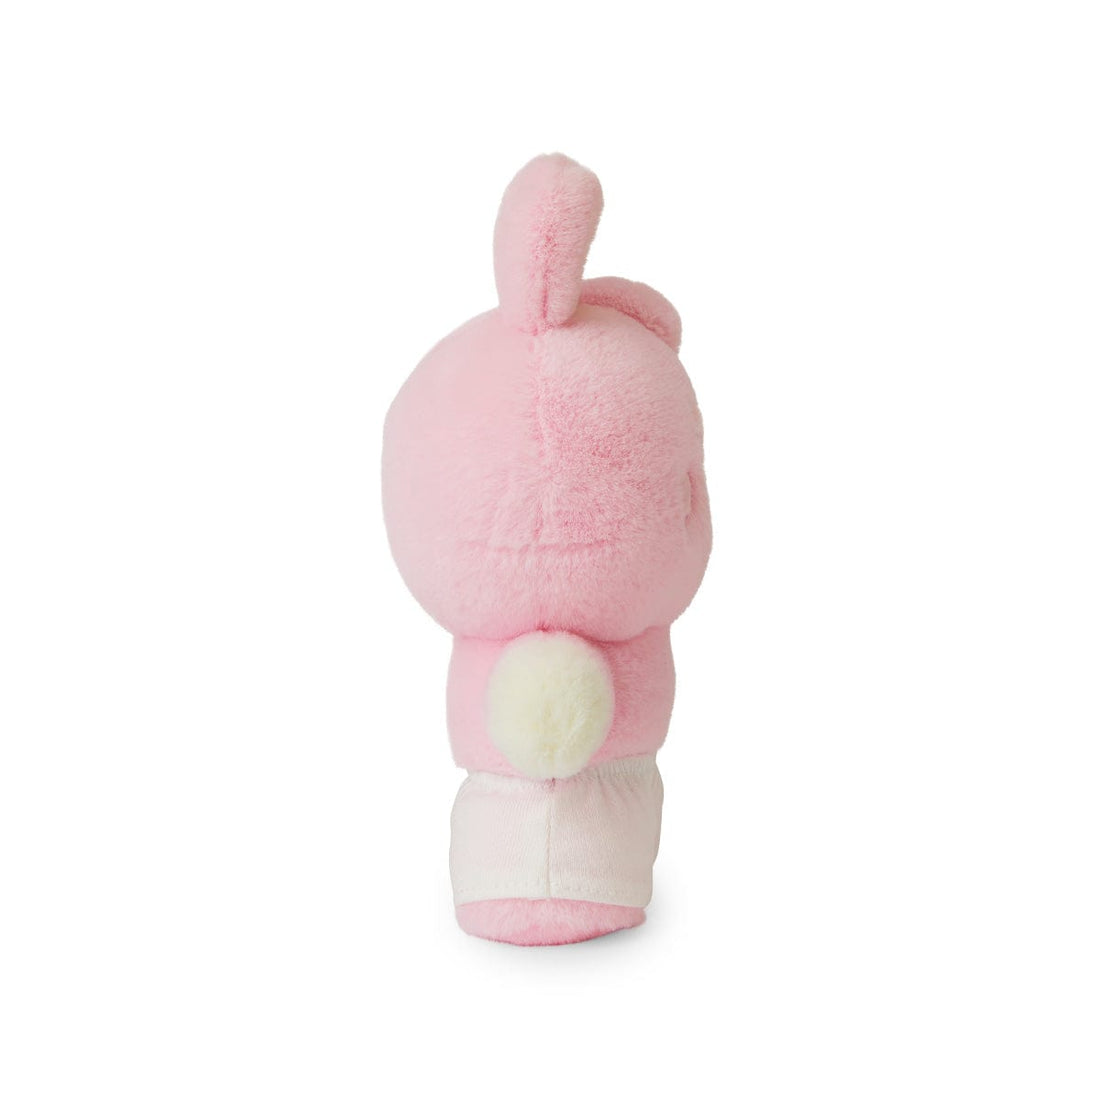 LINE FRIENDS TOYS COOKY BT21 COOKY BABY COSTUME PLUSH